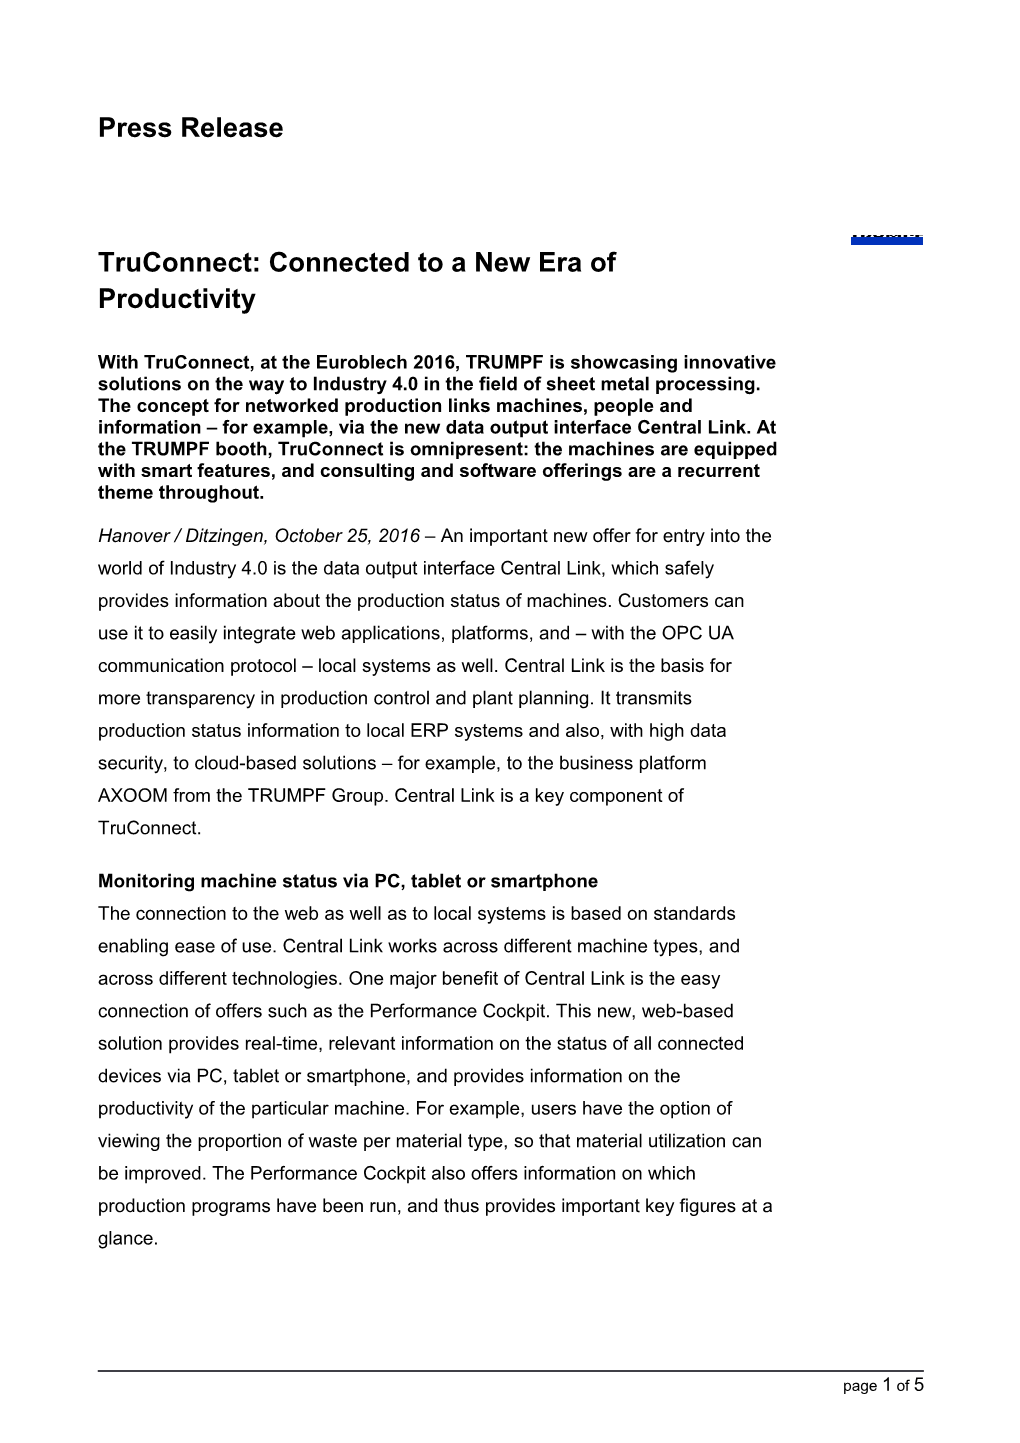 Truconnect: Connected to a New Era of Productivity